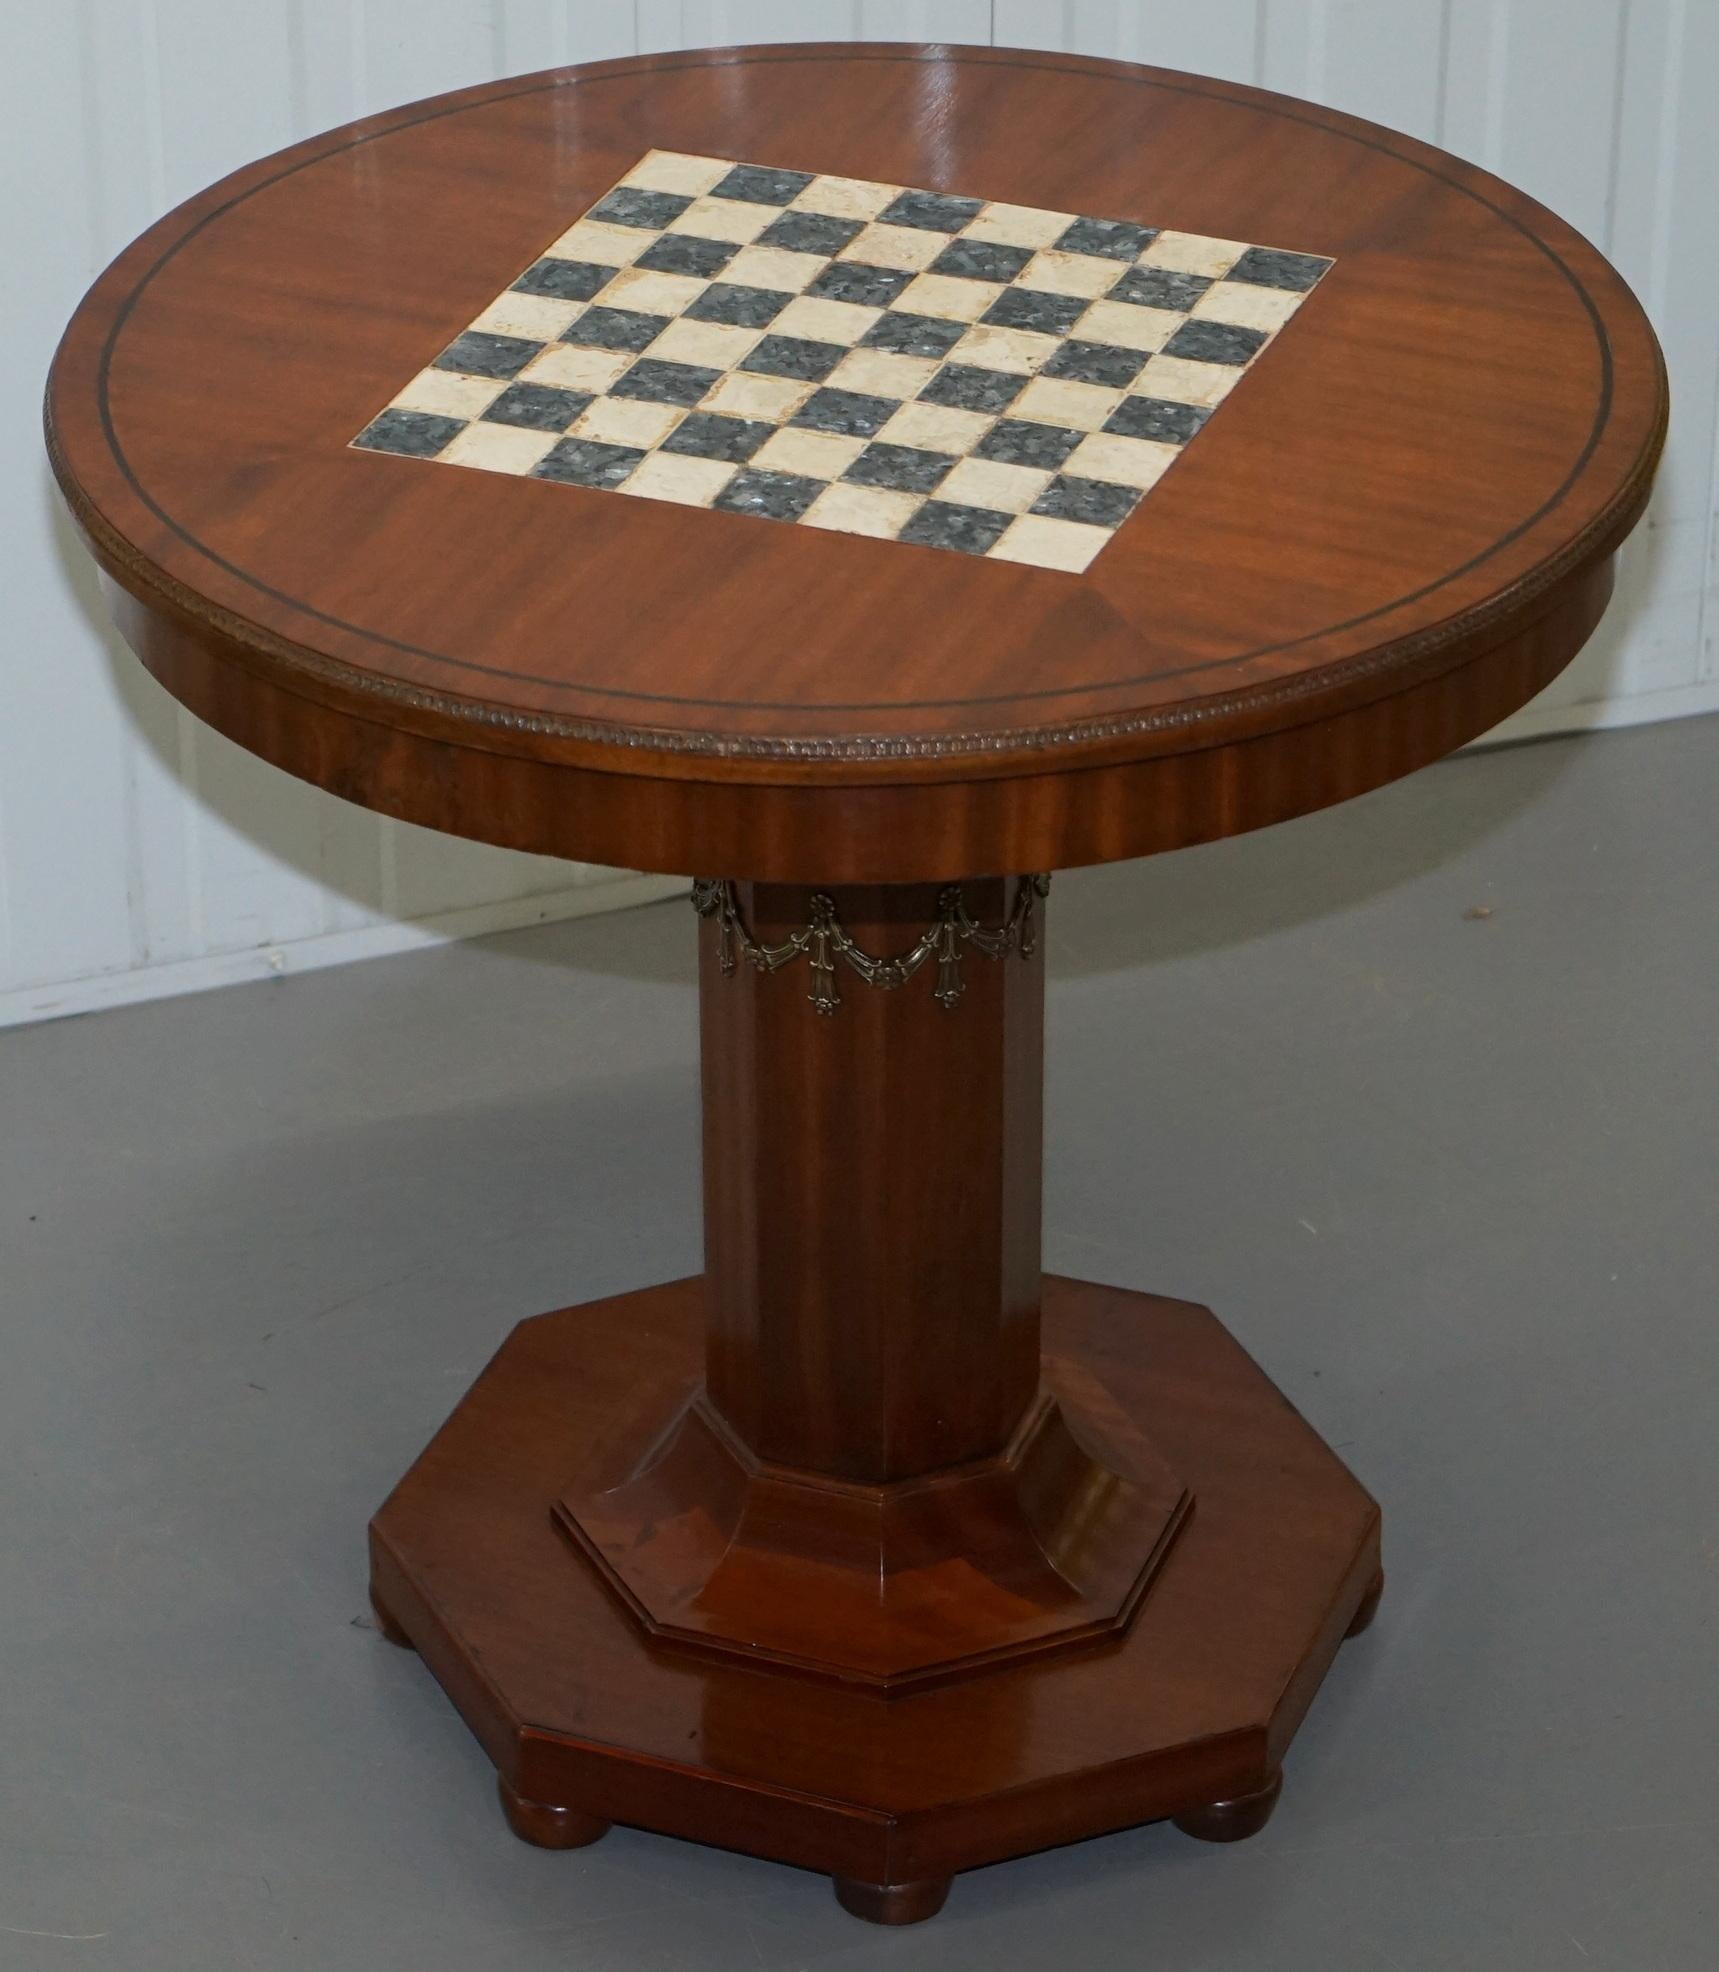 We are delighted to offer for sale this stunning fully restored Mahogany with ormolu floral detailing French Empire marble Chess table

A very good looking well made and function piece of furniture, extremely decorative, the piece has been fully